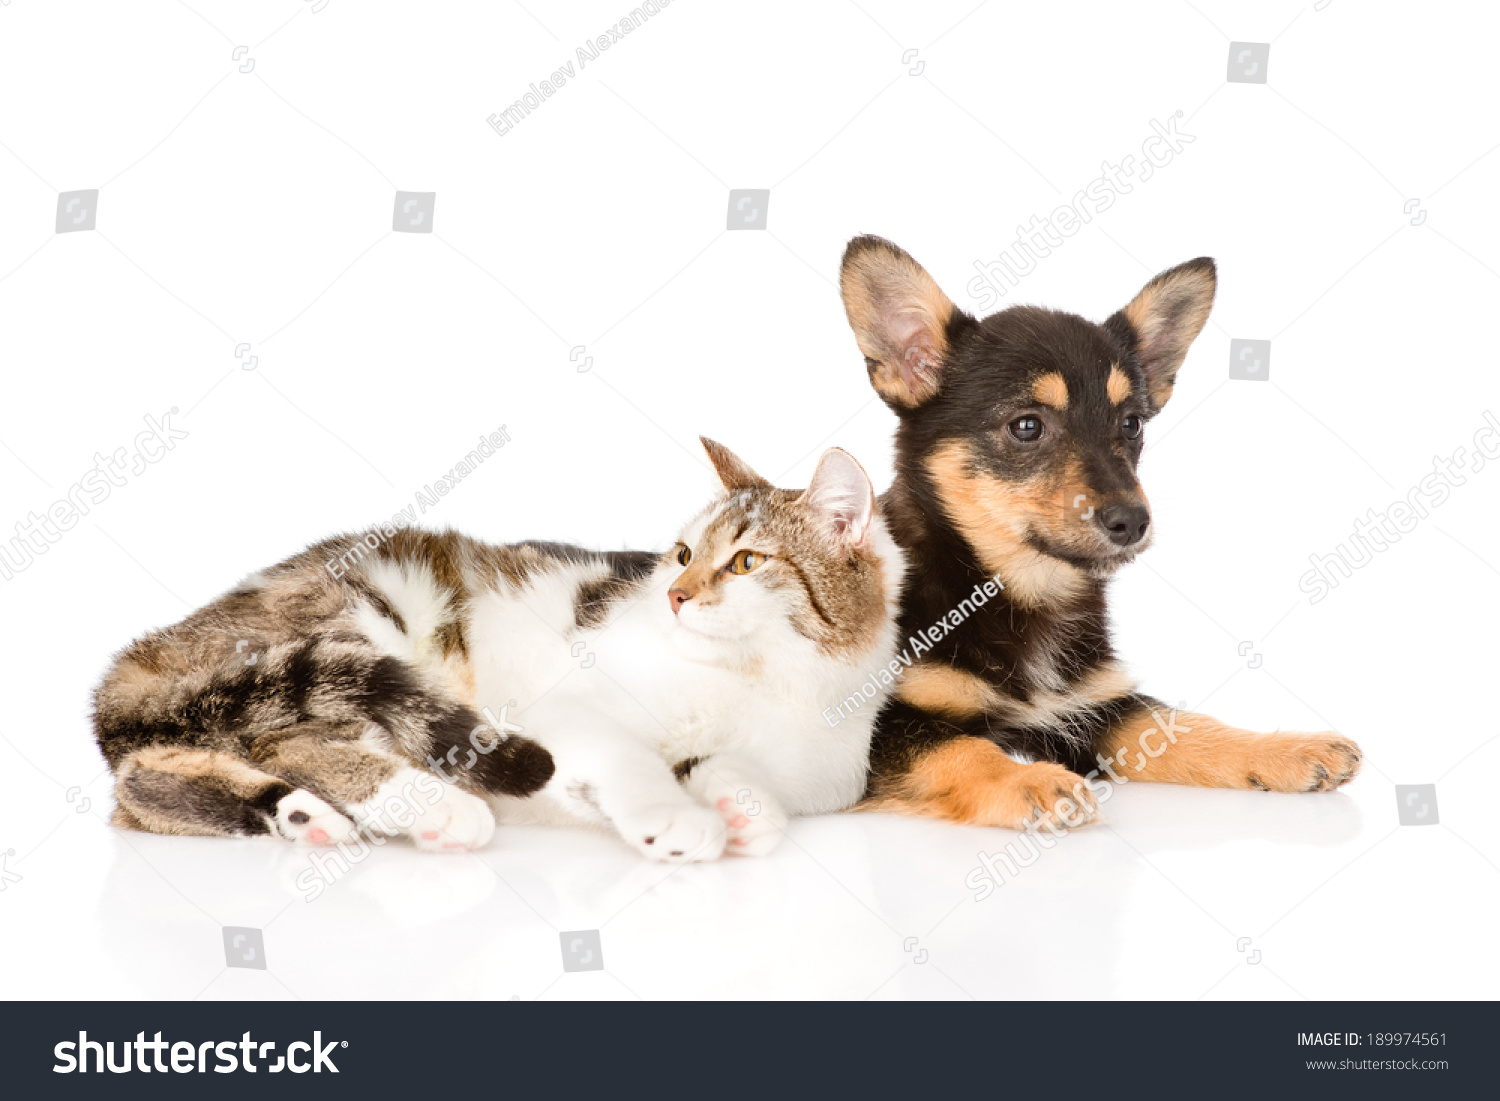 small puppy dog and kitten lying together. isolated on white background #189974561